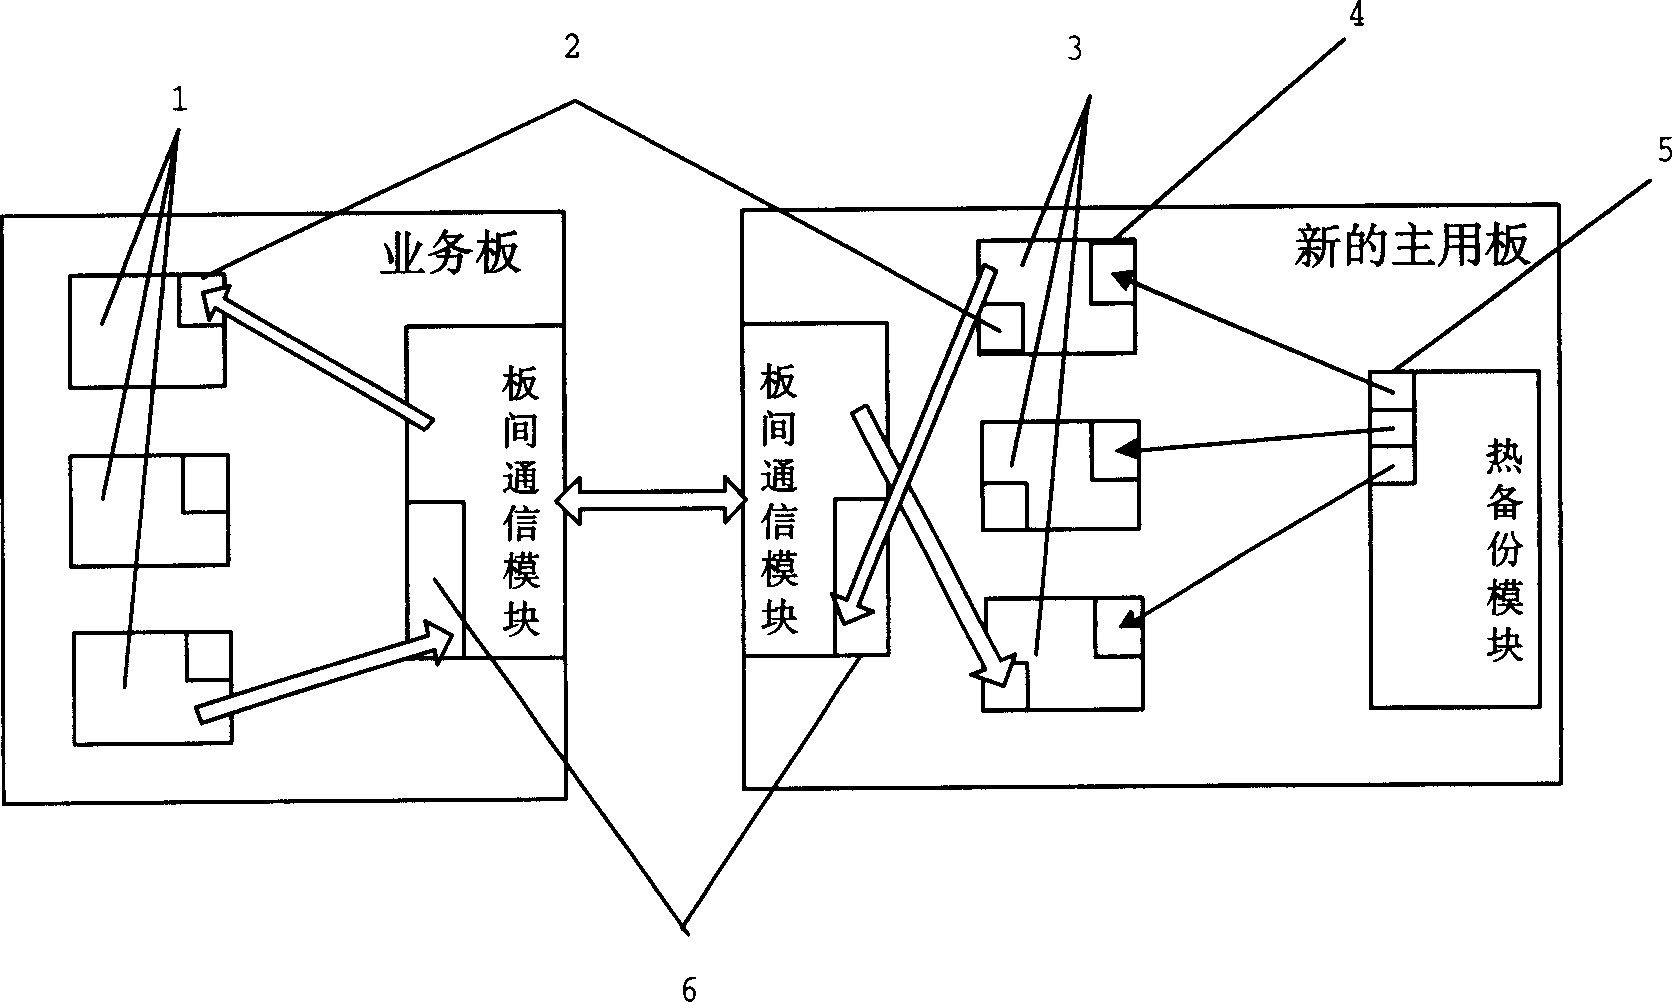 Method of data on line exchange between main control plate and business plate in main control plate thermal redundancy